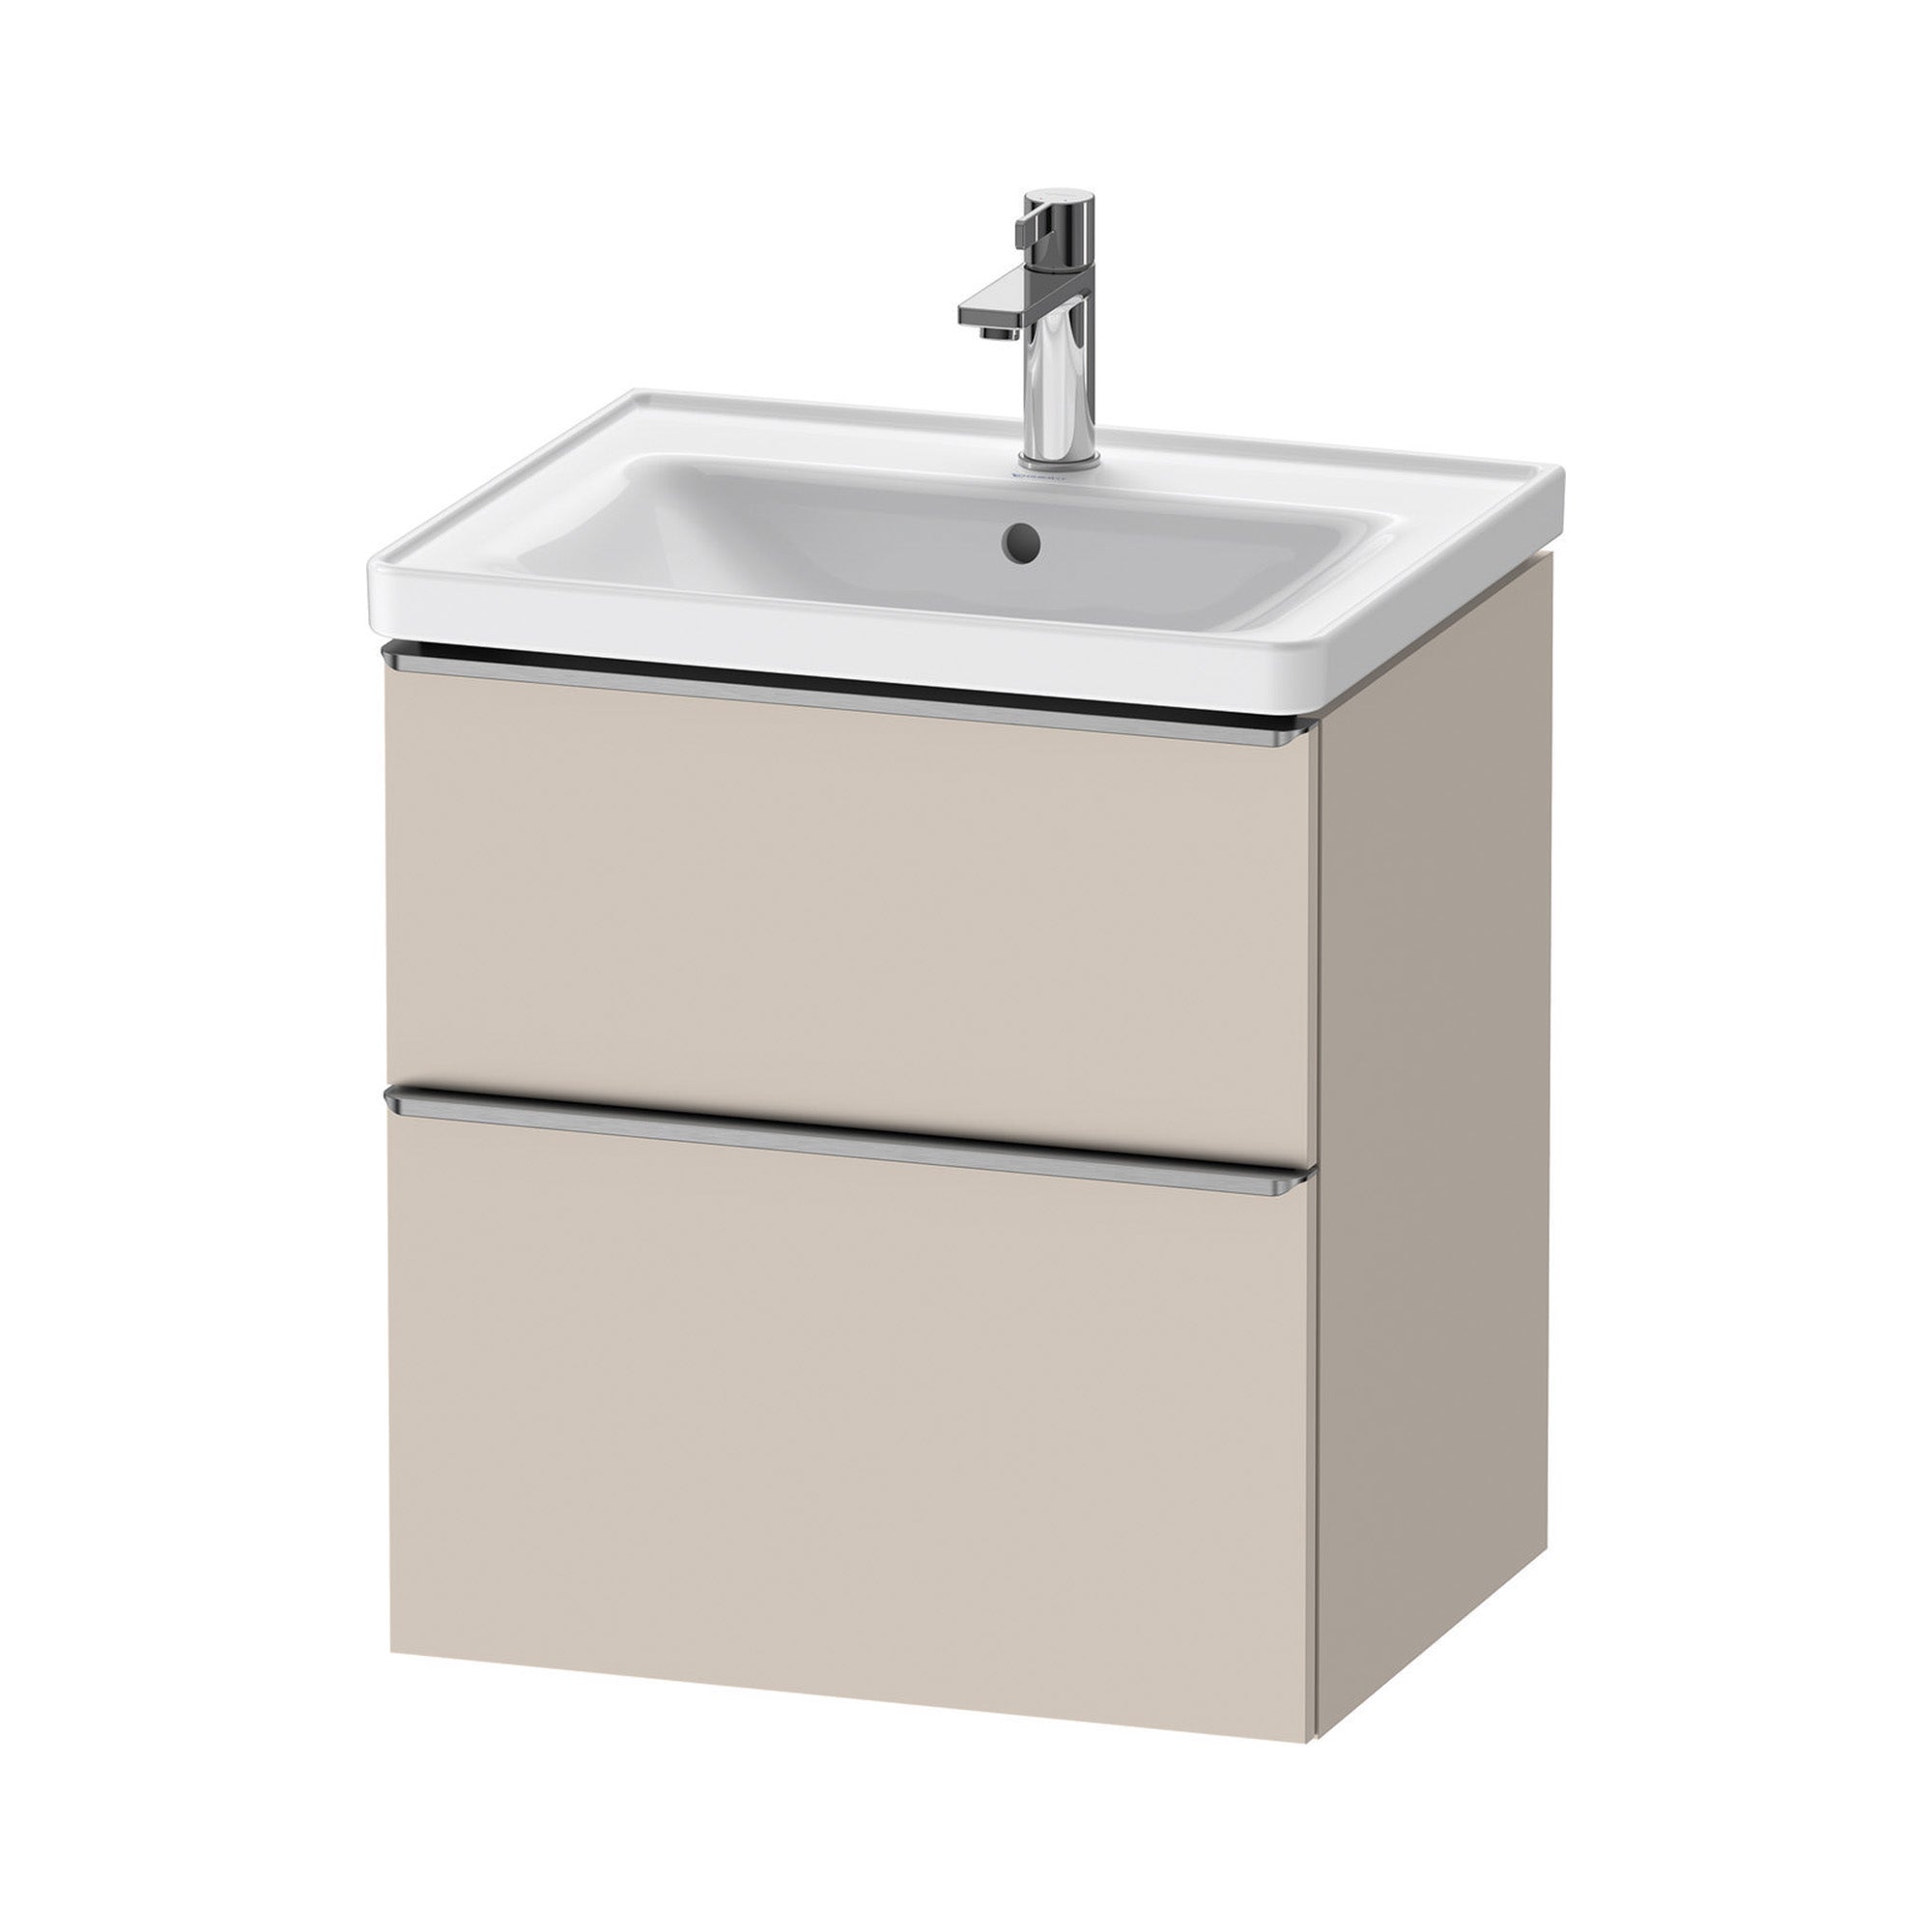 duravit d-neo 600 wall mounted vanity unit with d-neo basin taupe stainless steel handles